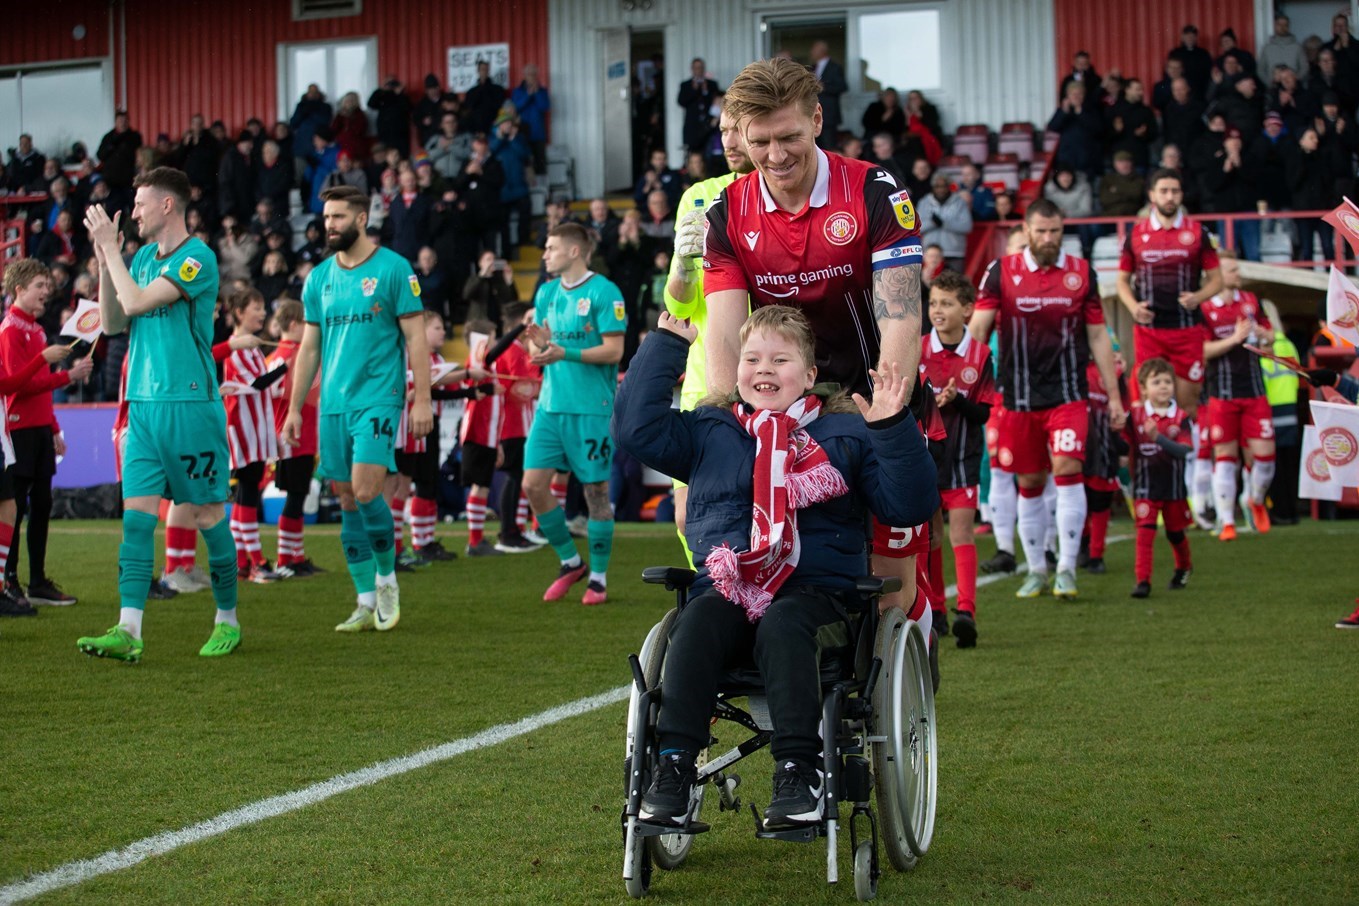 Wheelchair user Archie Riley leads out the Stevenage team vs Tranmere last season